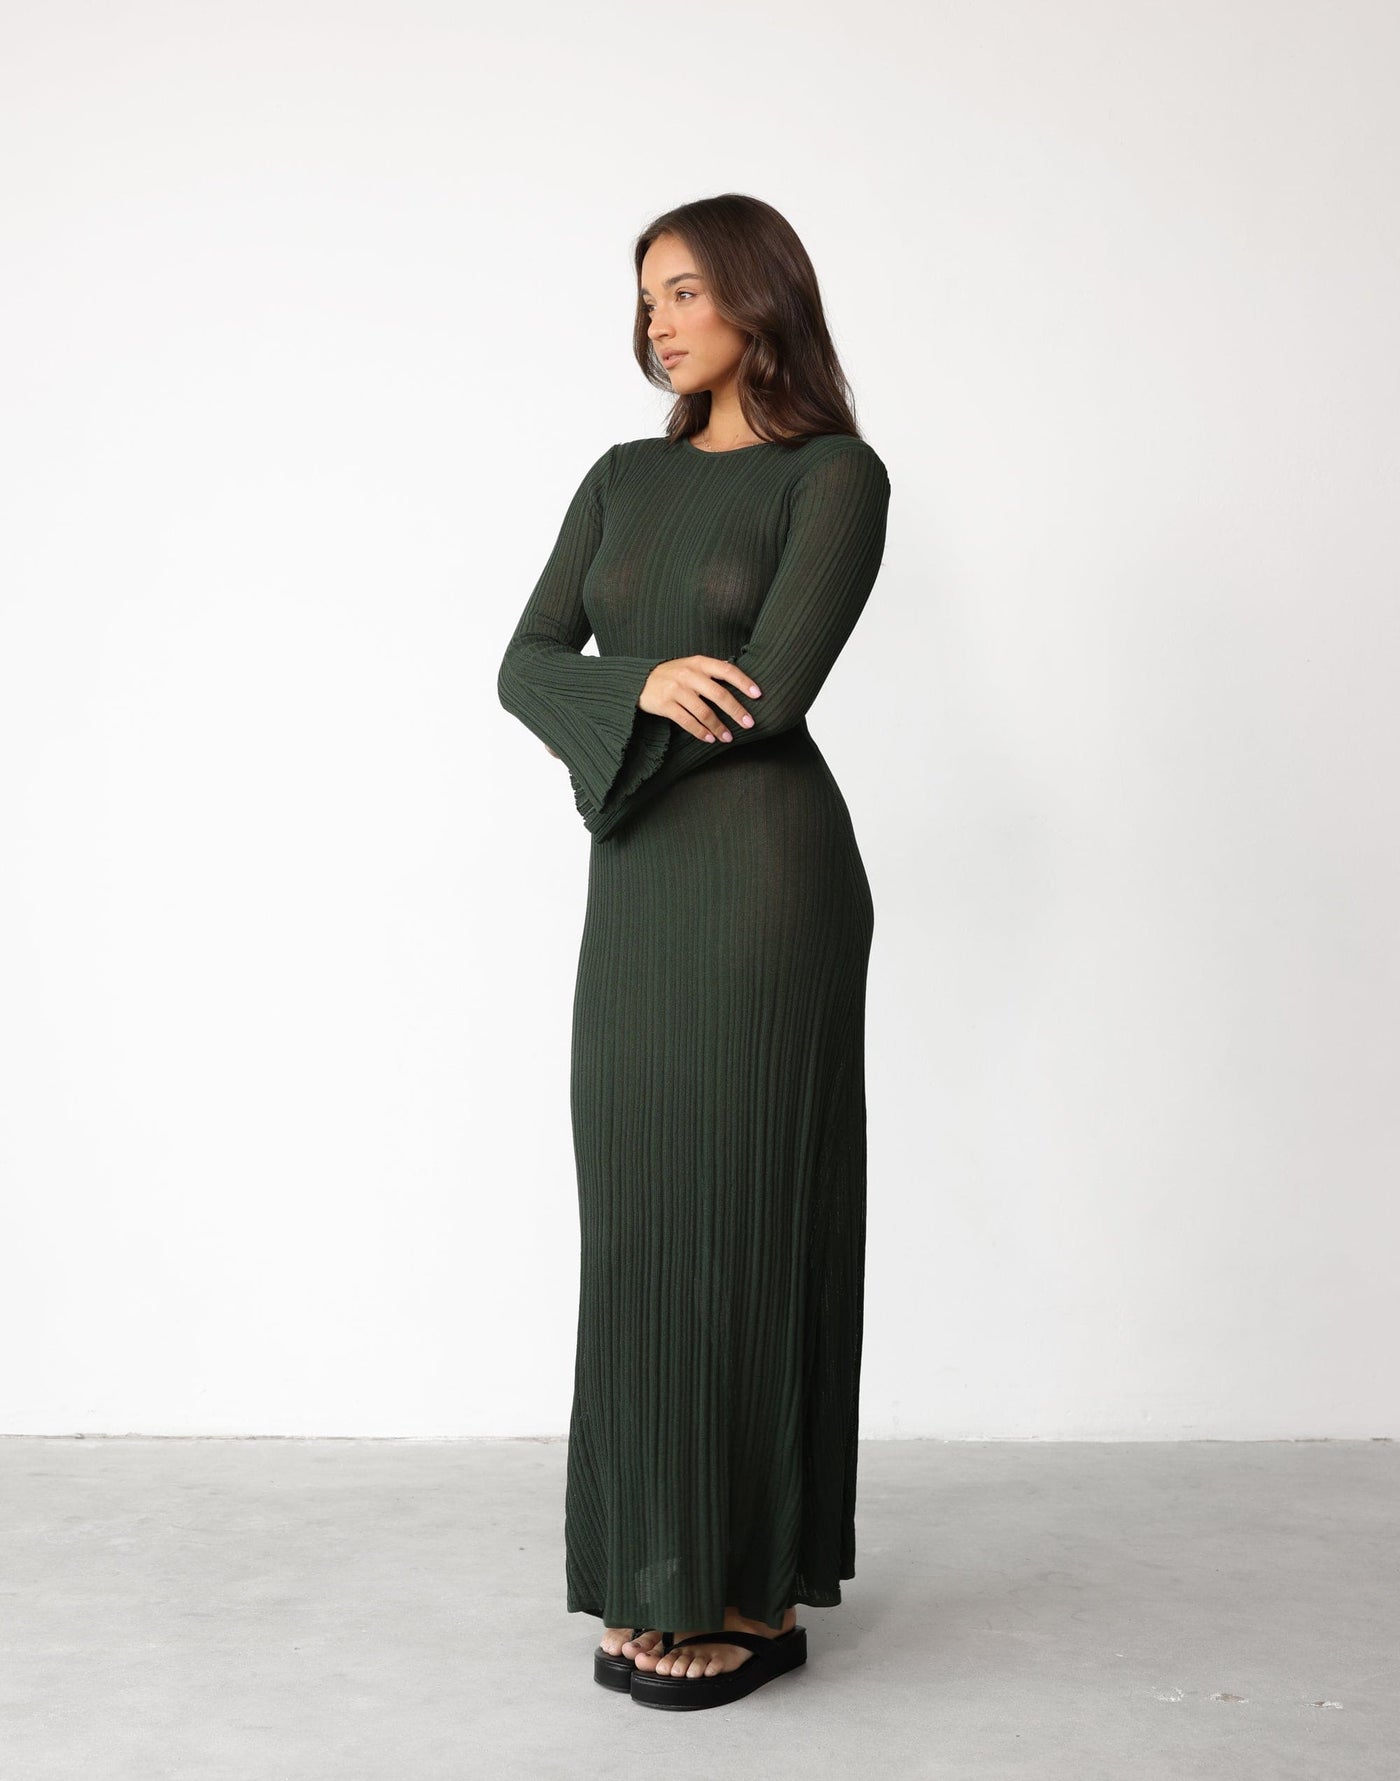 Harmonia Maxi Dress (Forest) - Flared Sleeve Ribbed Stretchy Bodycon Dress - Women's Dress - Charcoal Clothing